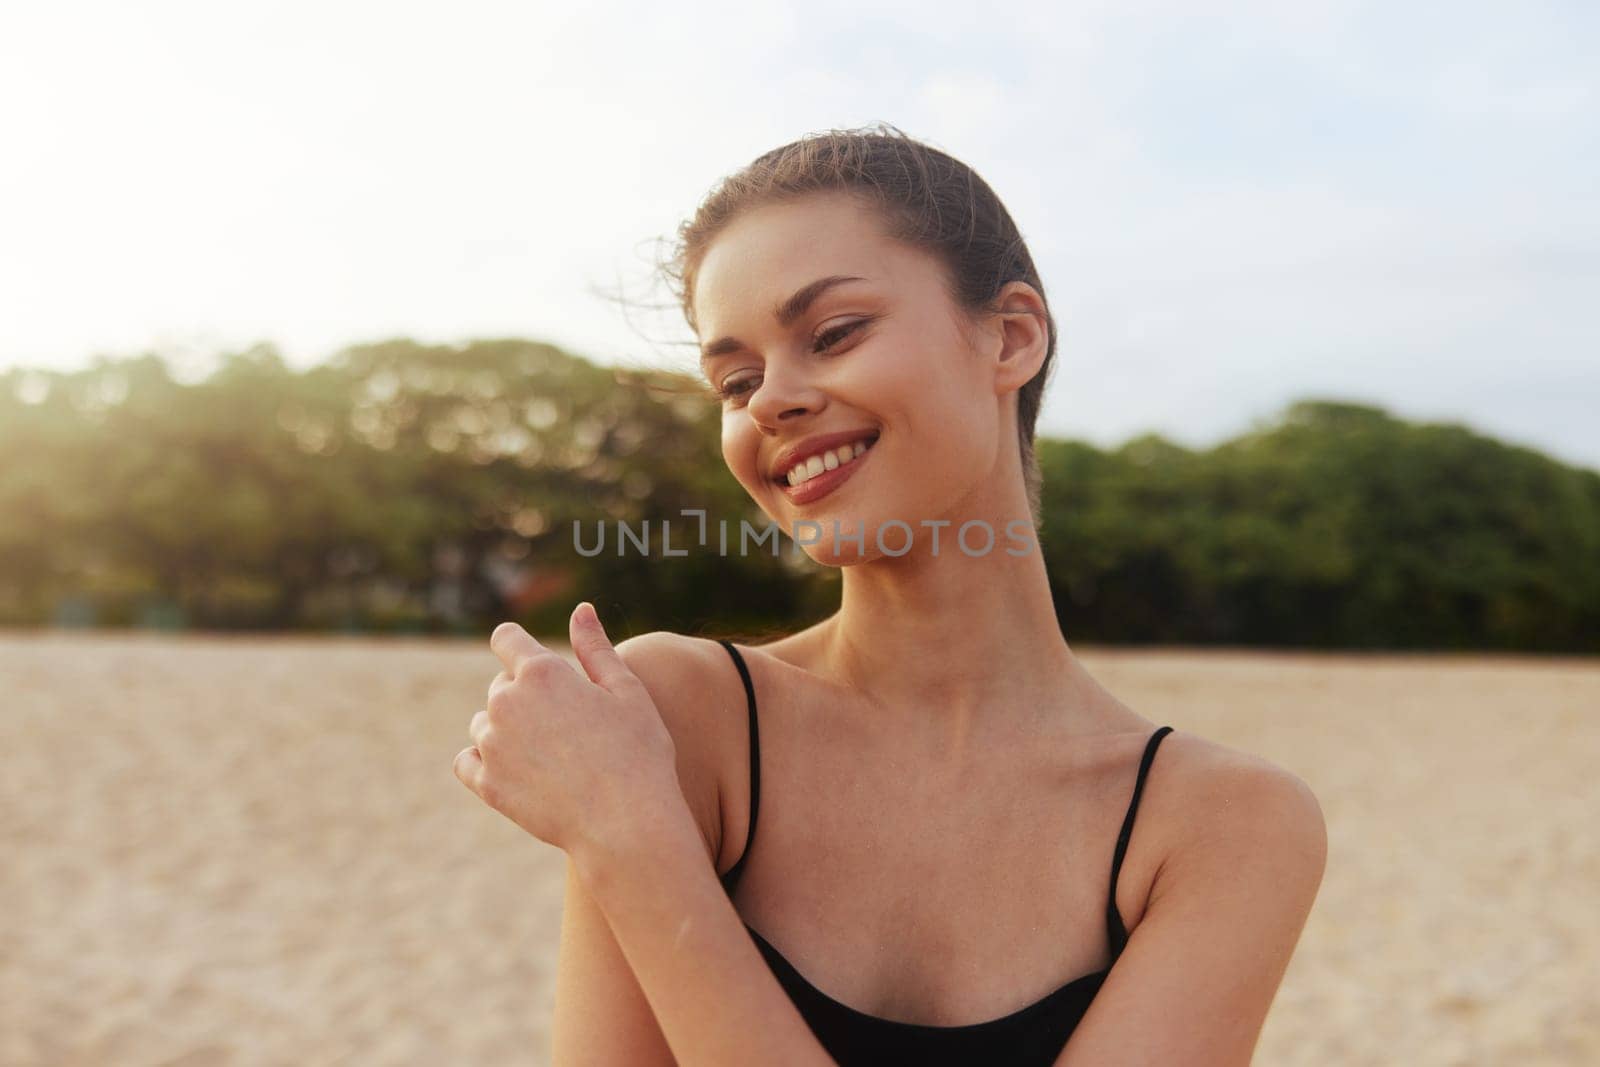 woman adult relax beach space lifestyle peaceful vacation copy happiness sea girl sunset ocean dress smile outdoor sand summer water freedom walking